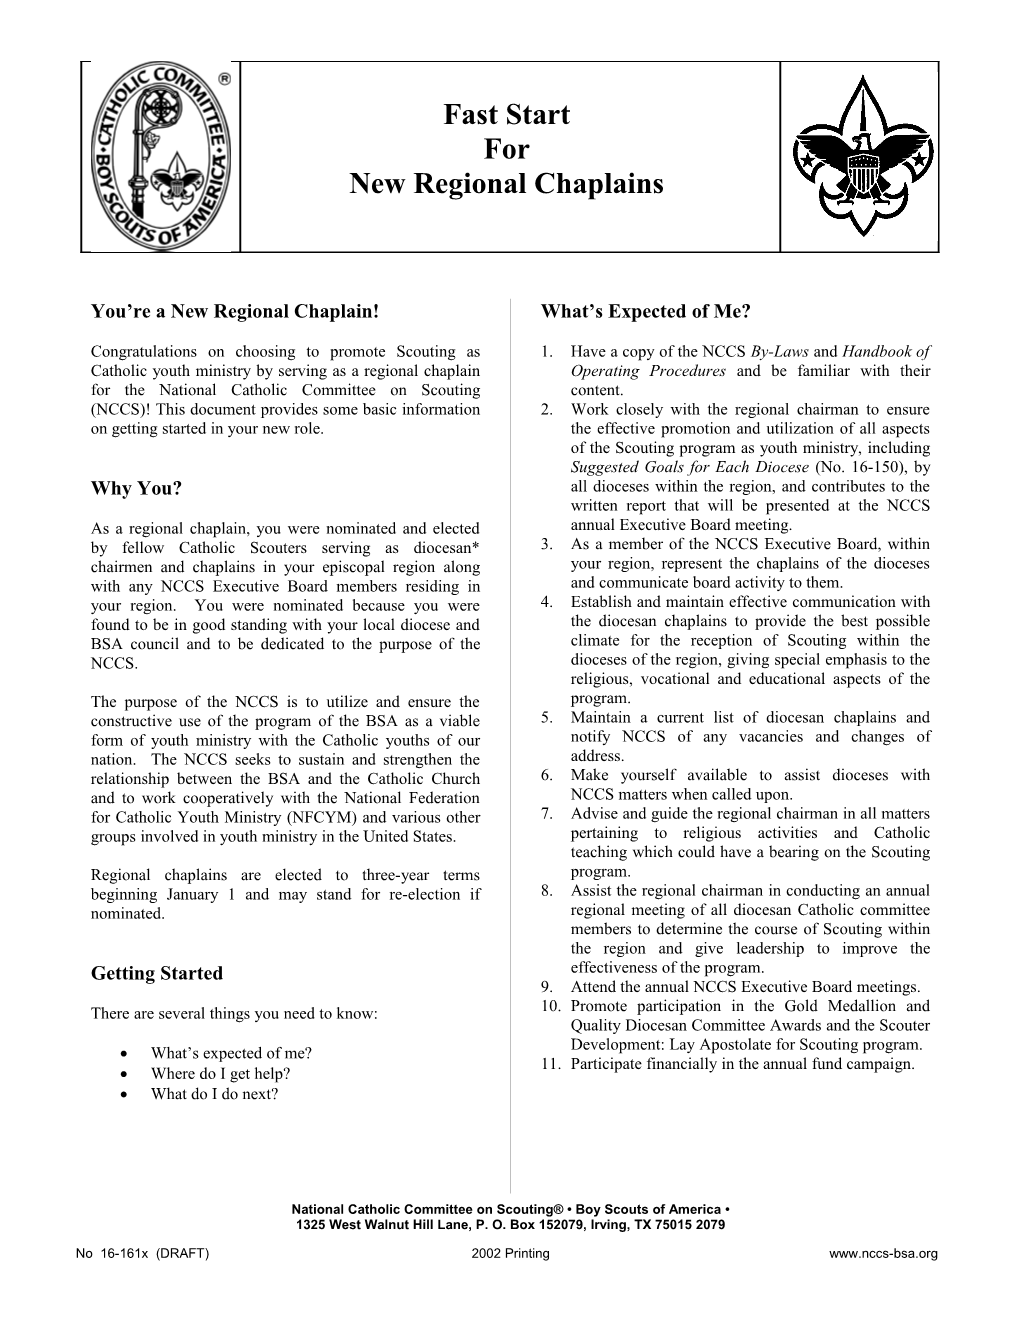 Scouter Development: Lay Apostolate Formation for Scouting